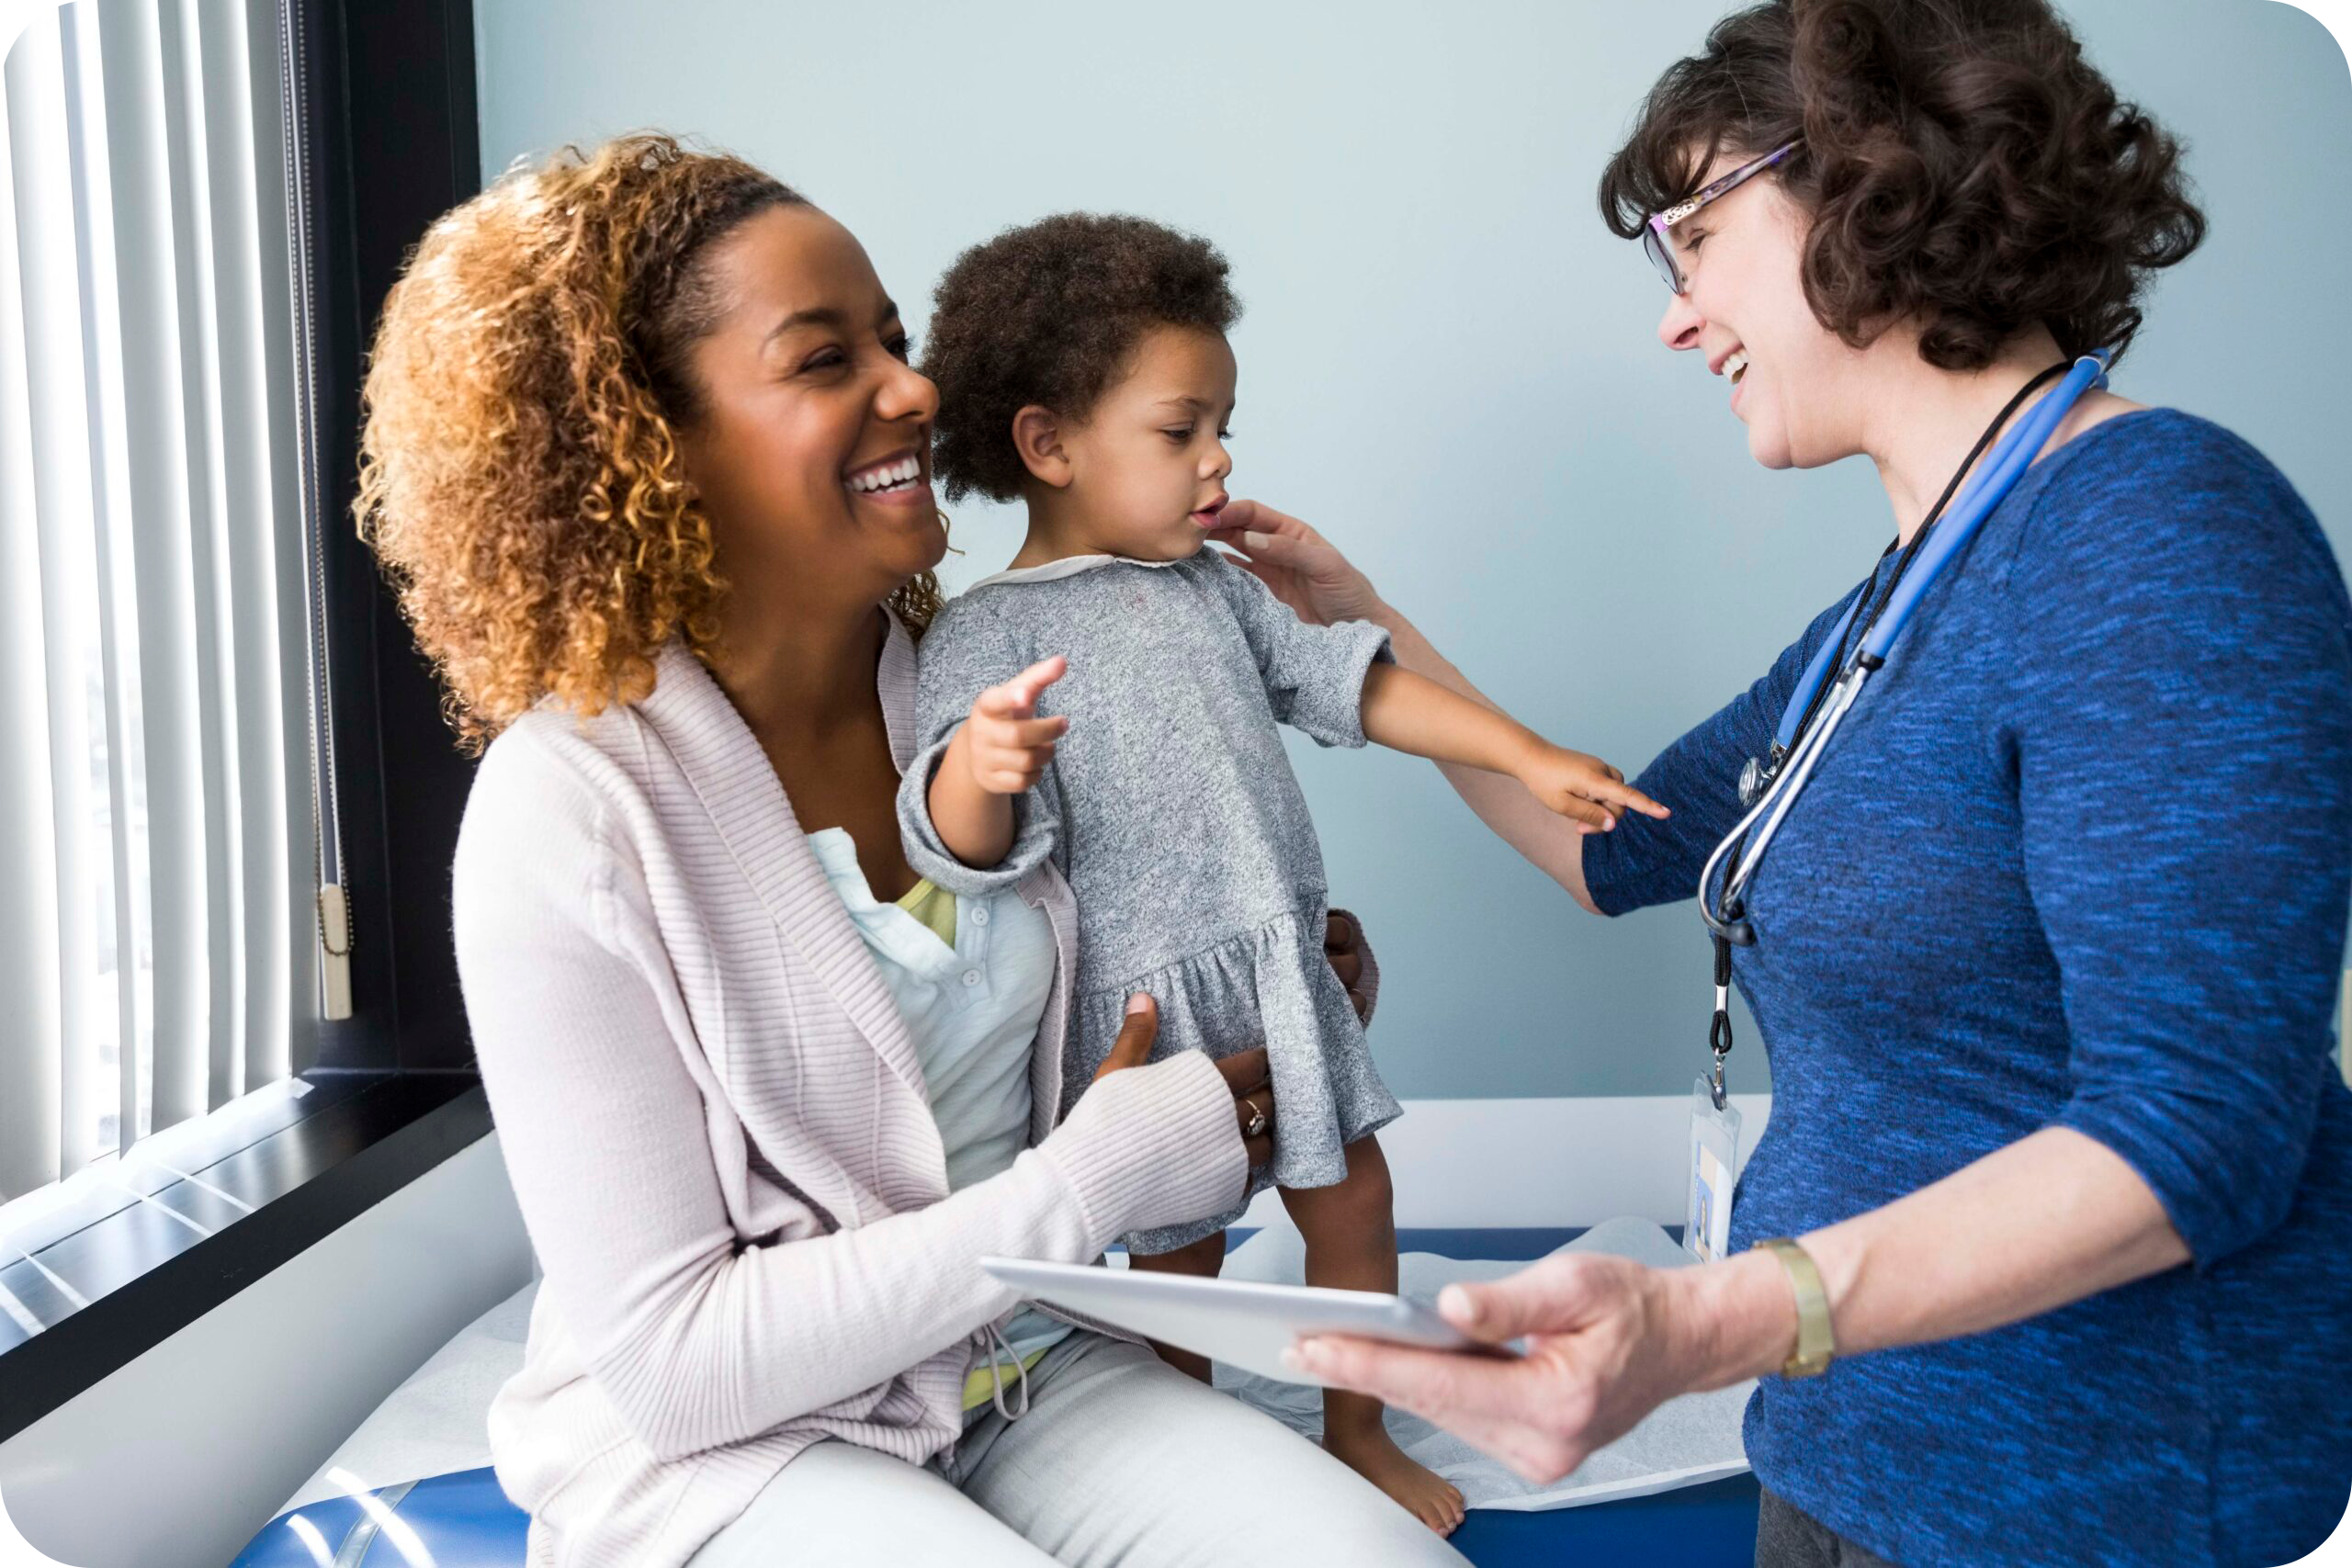 A strong primary care connection